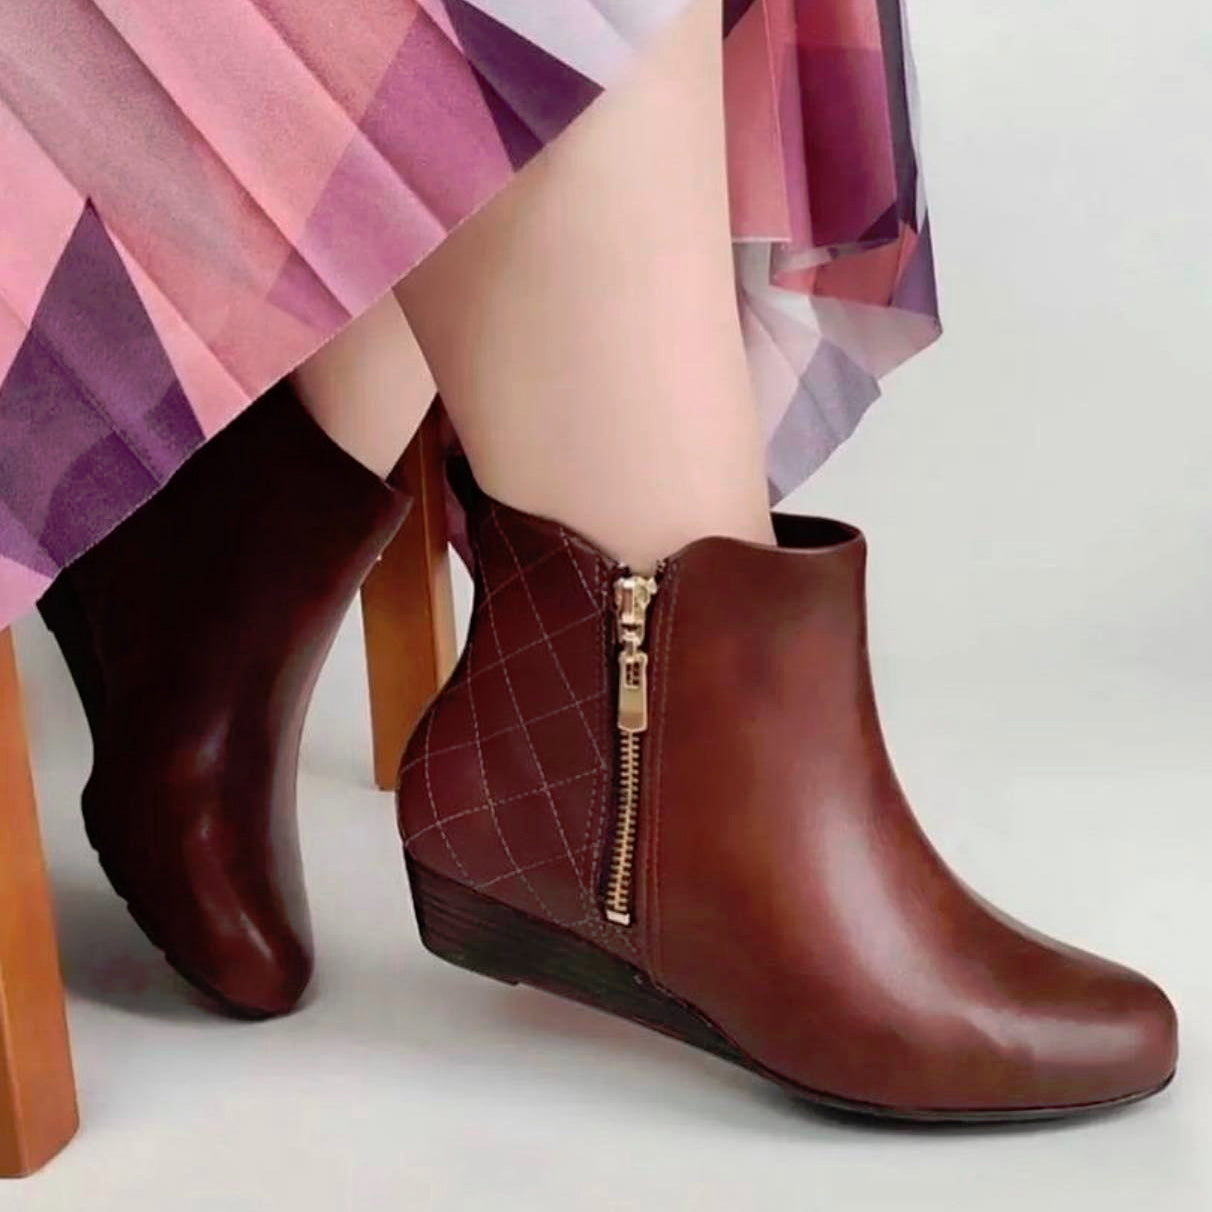 Modare 7076-102 Low Heel Wedged Ankle Boot in Pine